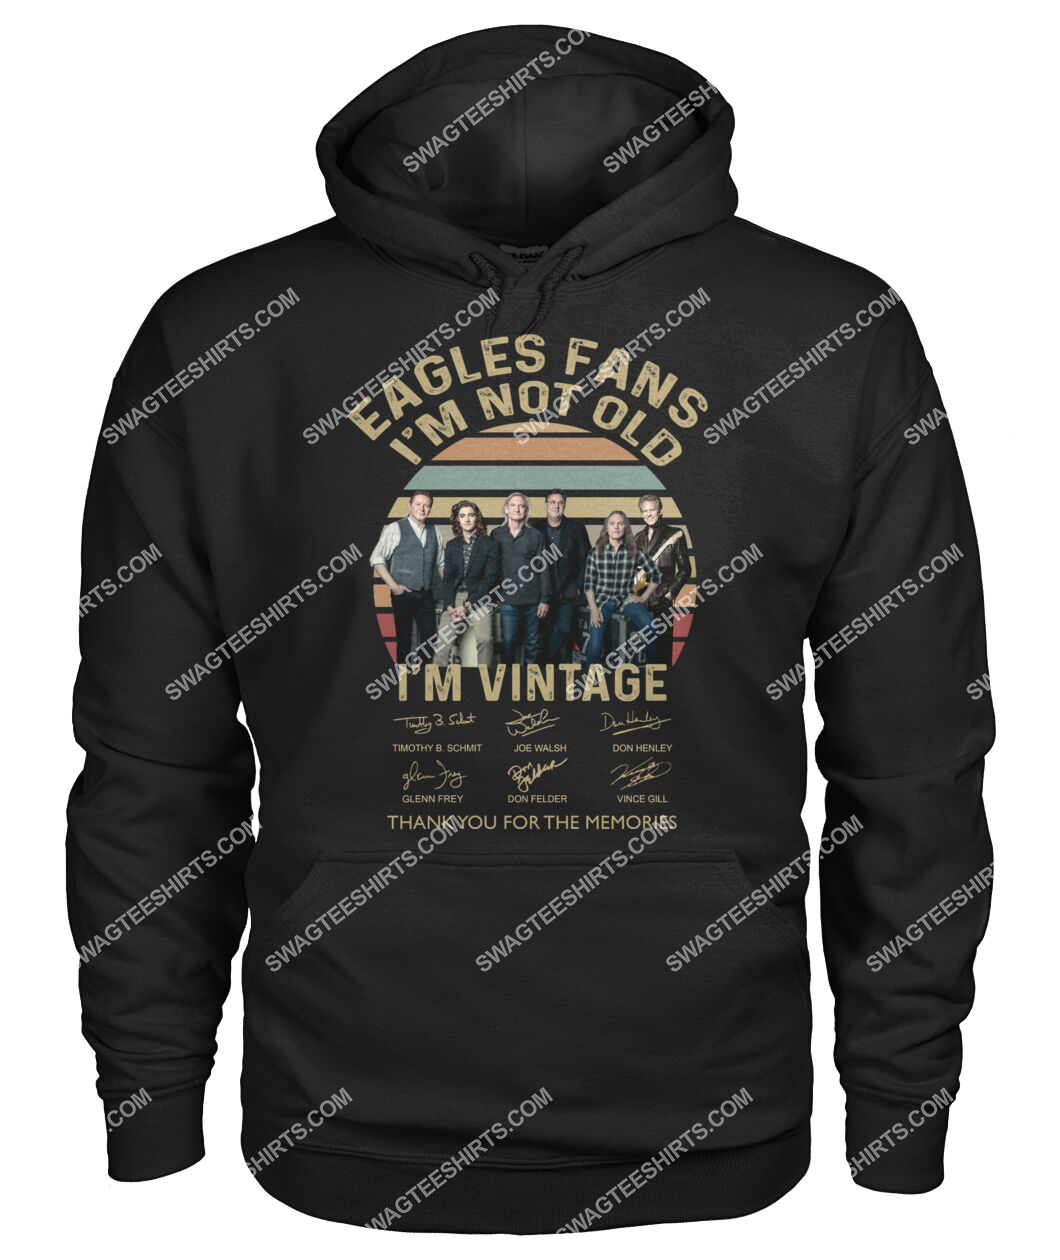 eagles fan i'm not old i'm vintage thank you for memories signature hoodie 1